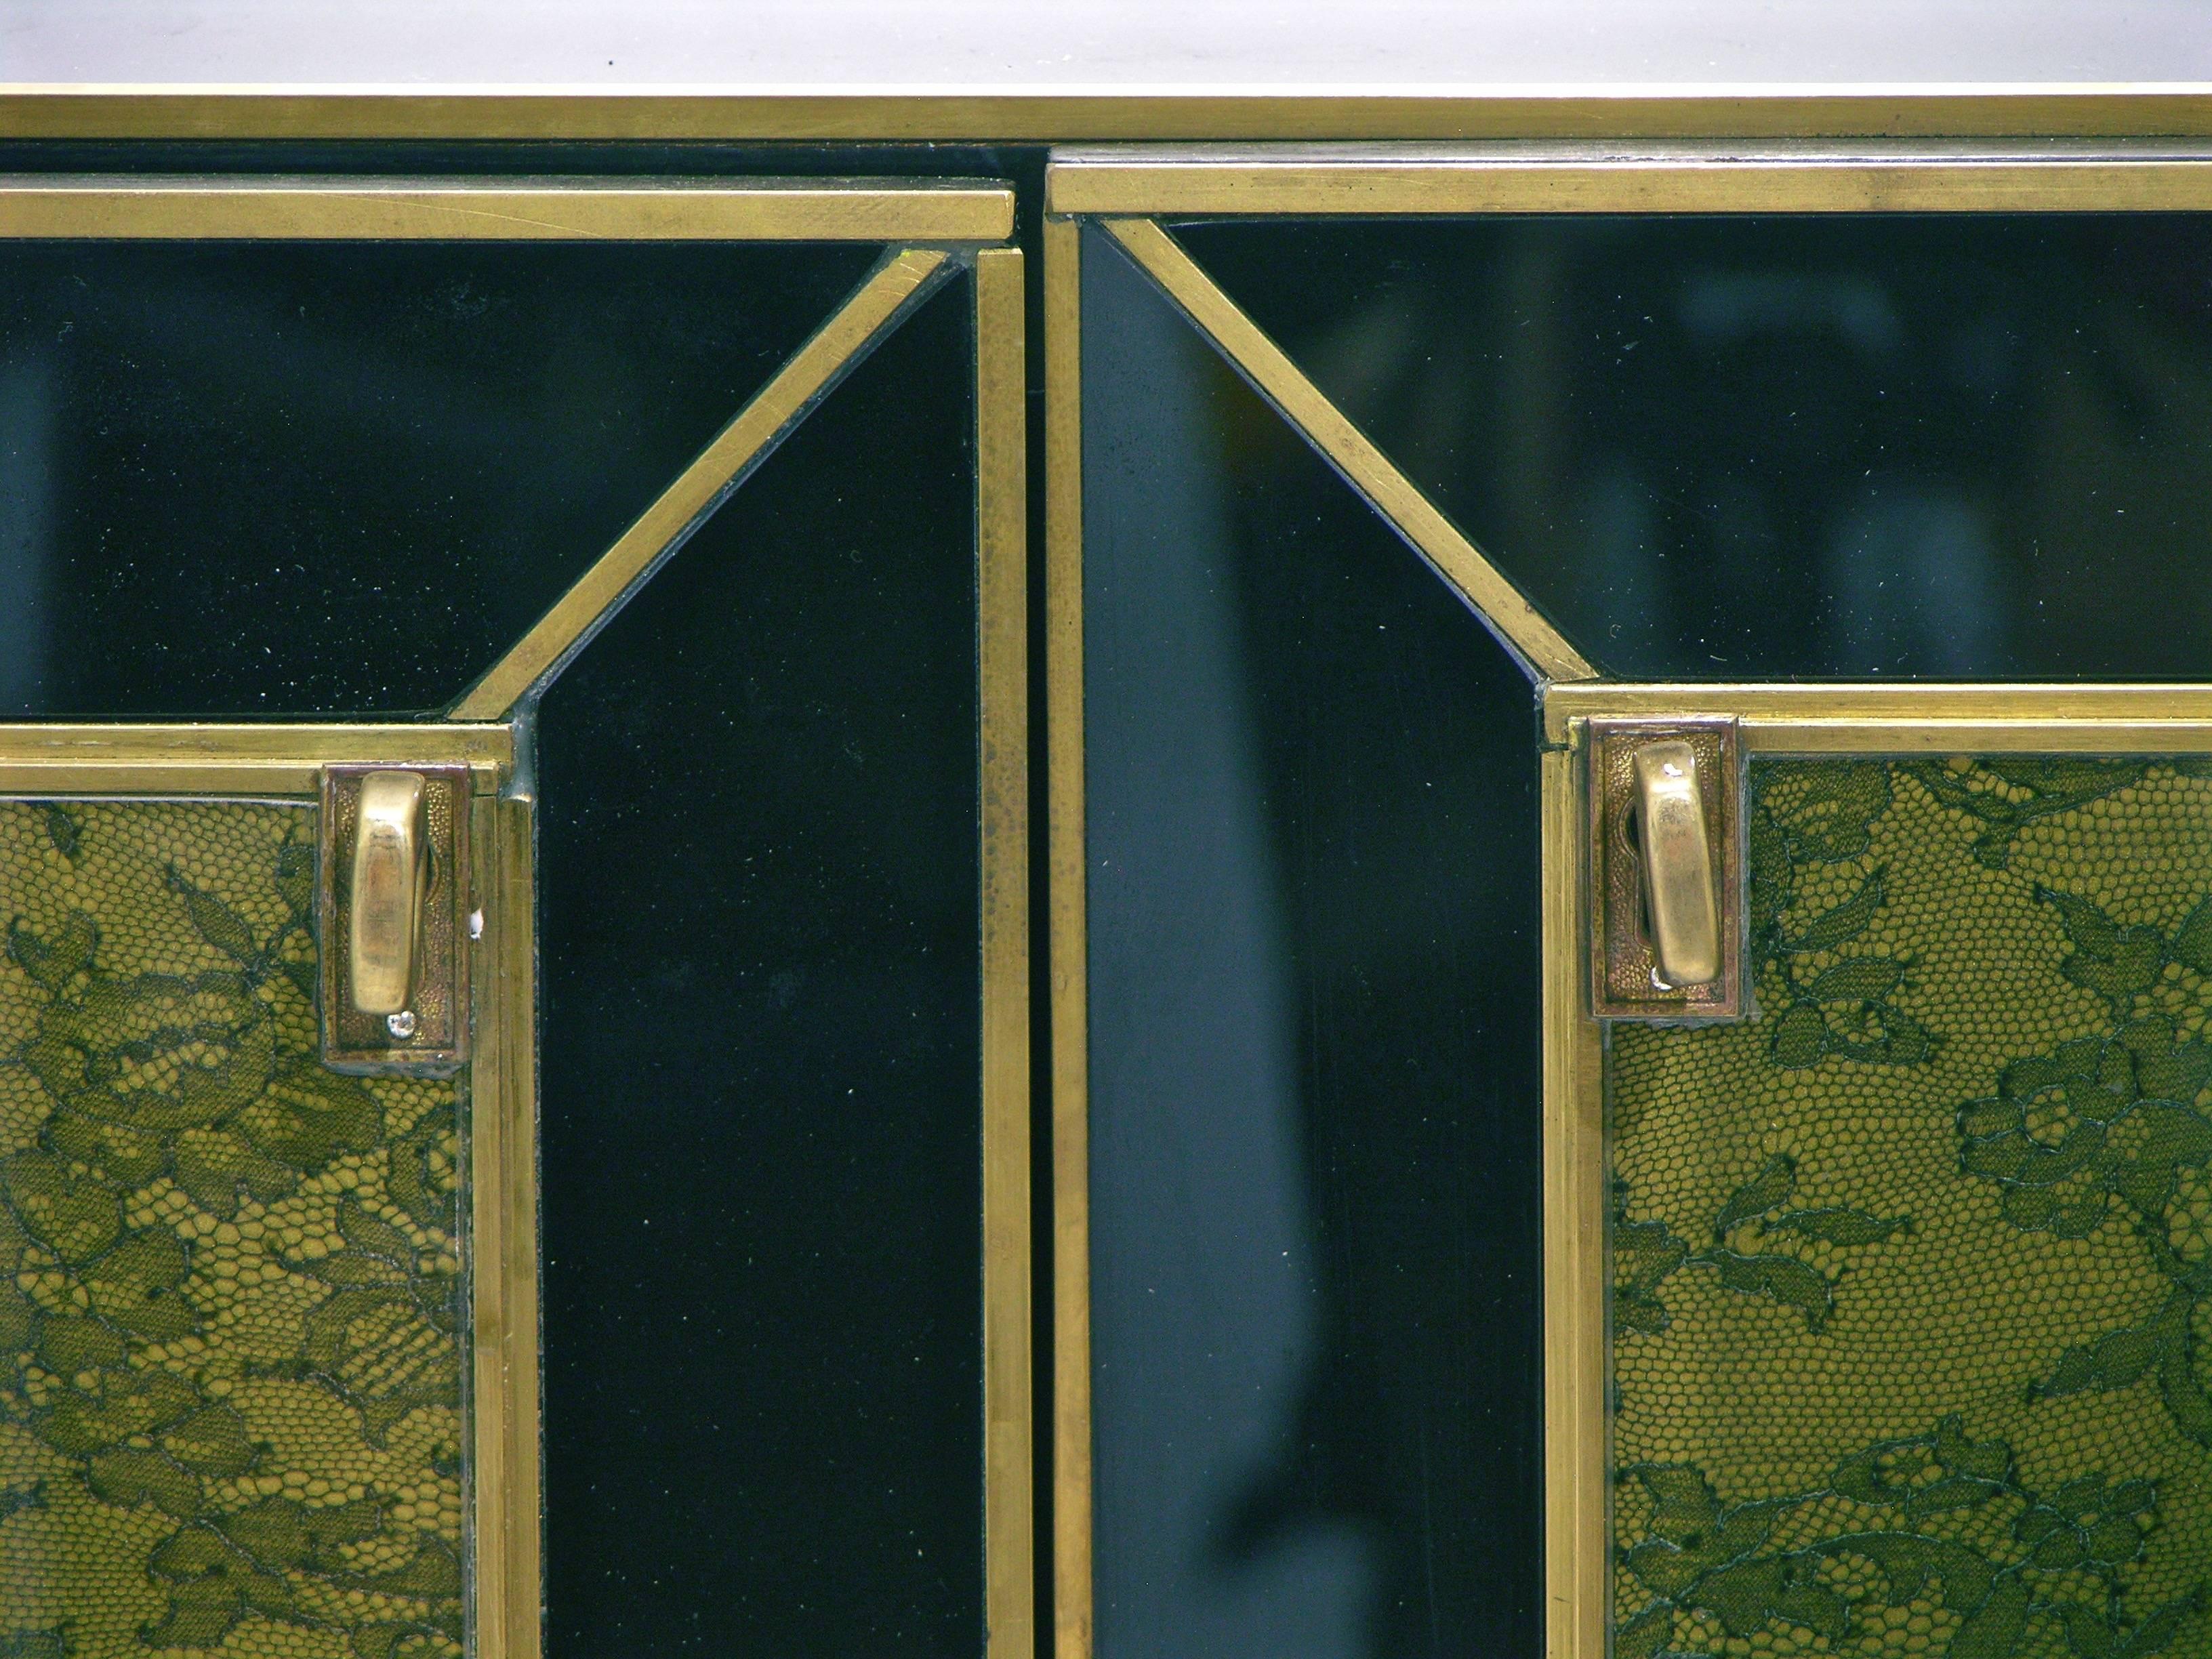 Romantic 1970s One-of-a-Kind Italian Brass & Black Glass Cabinet with Green Lace Inlays